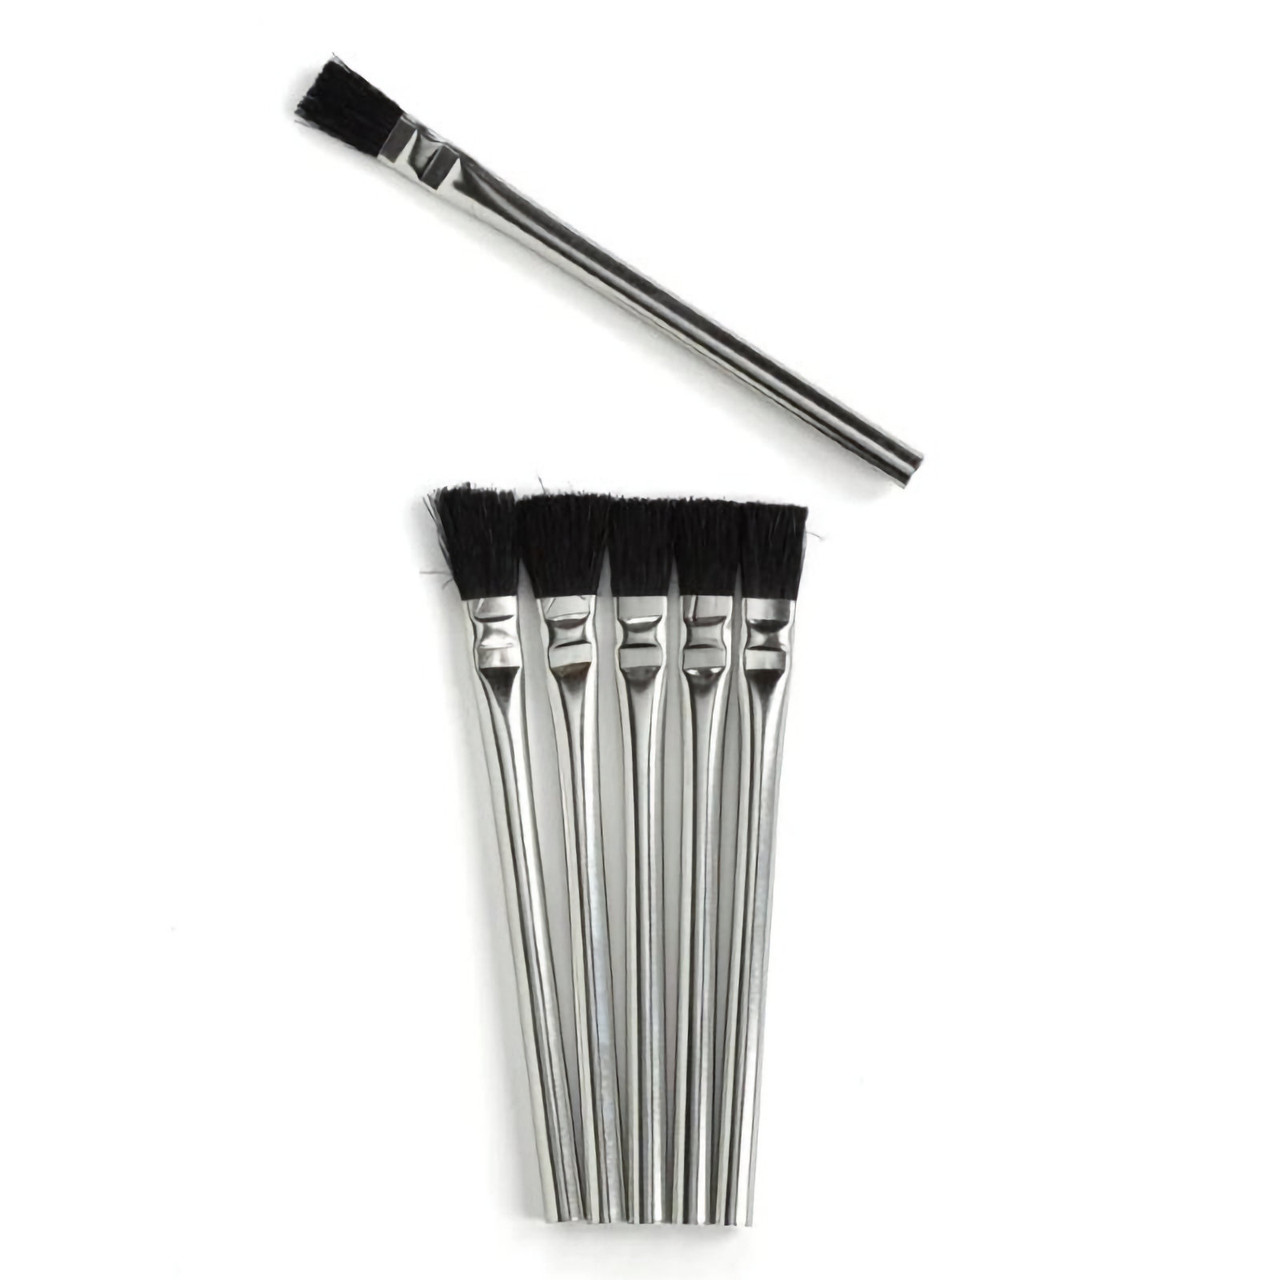 Tandy Leather Disposable Glue Brushes 6 Pack 3432-00